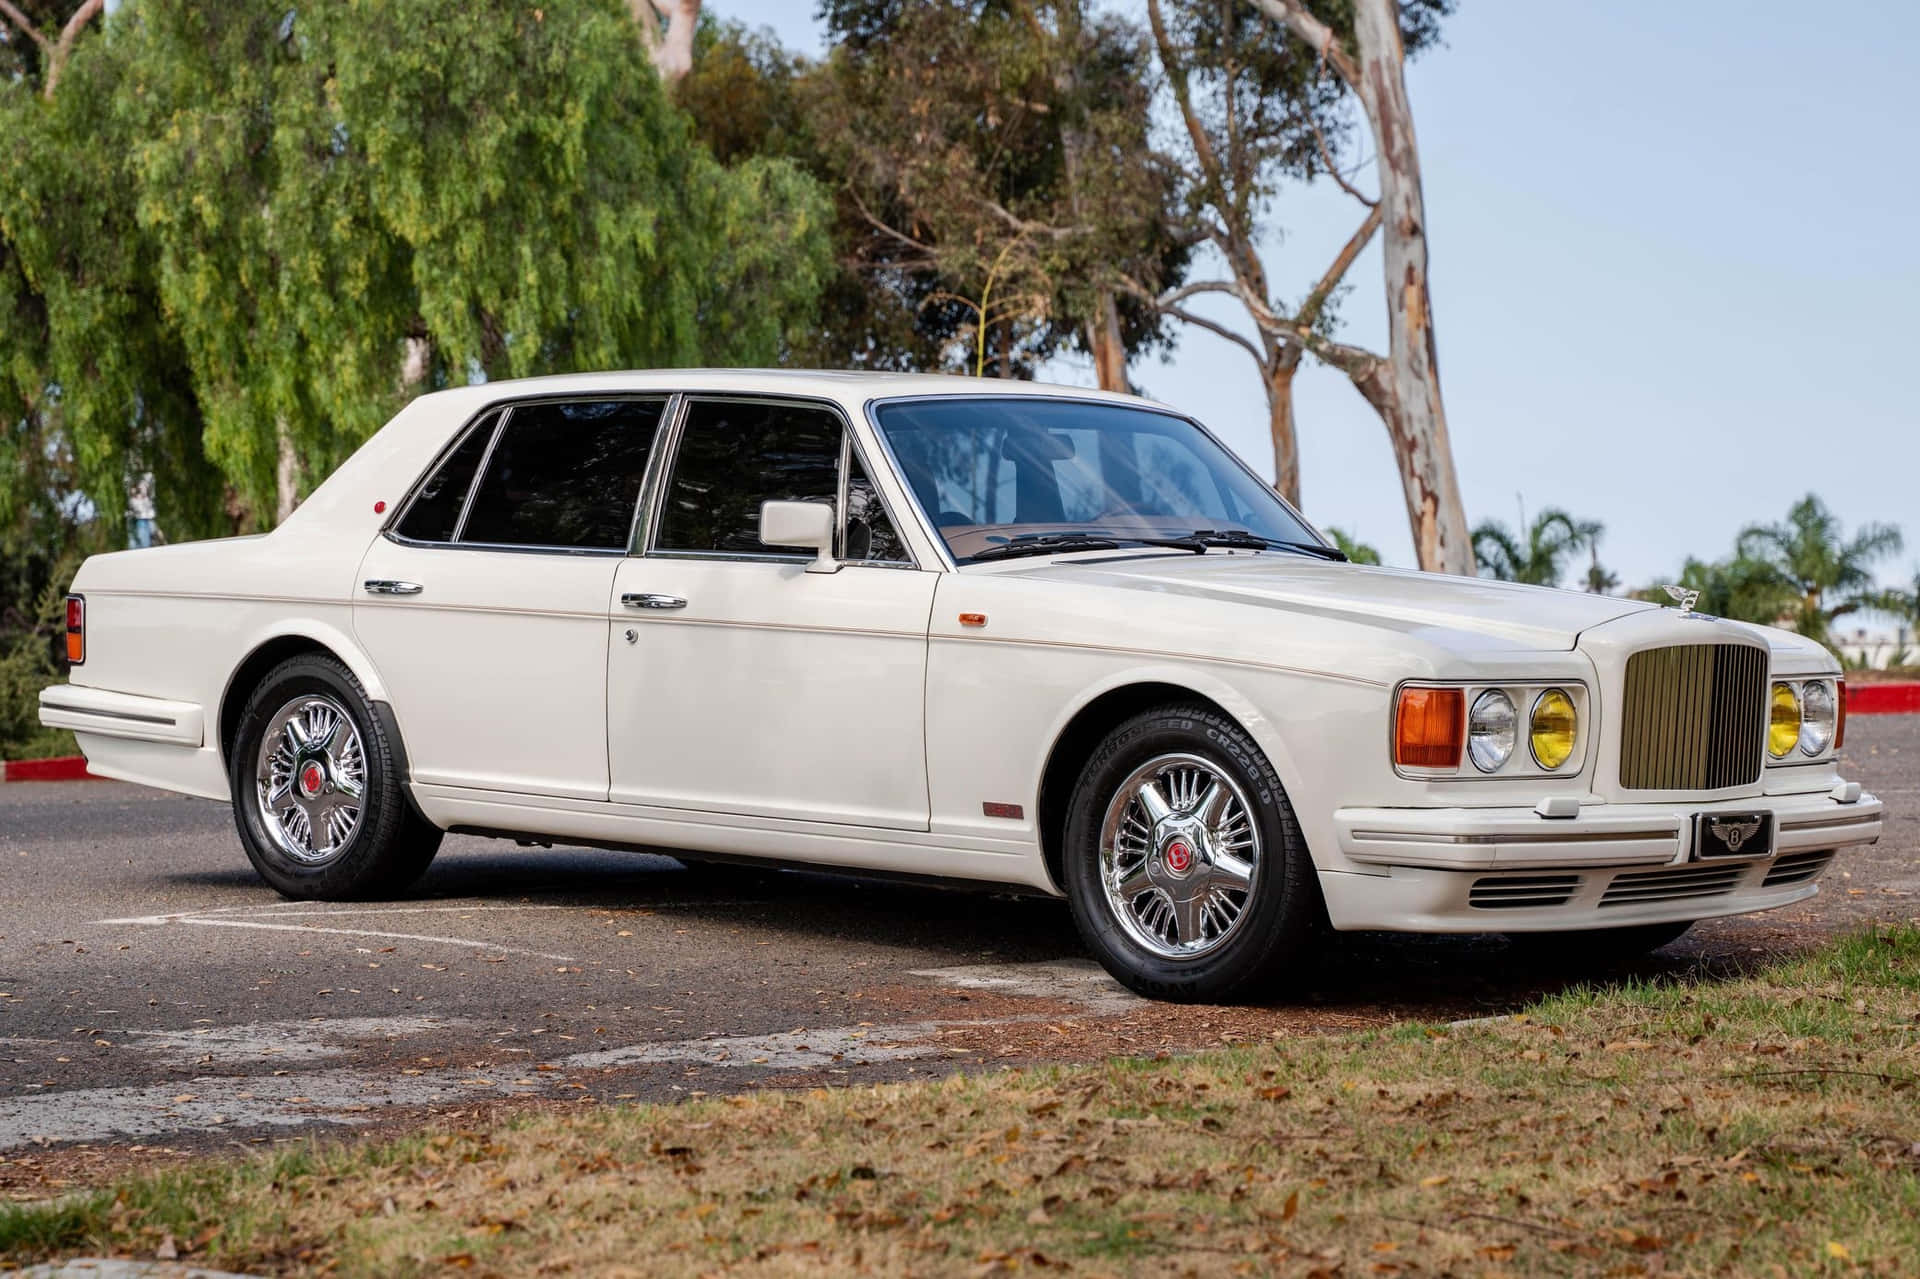 Caption: A Classic Bentley Turbo R on the Road Wallpaper